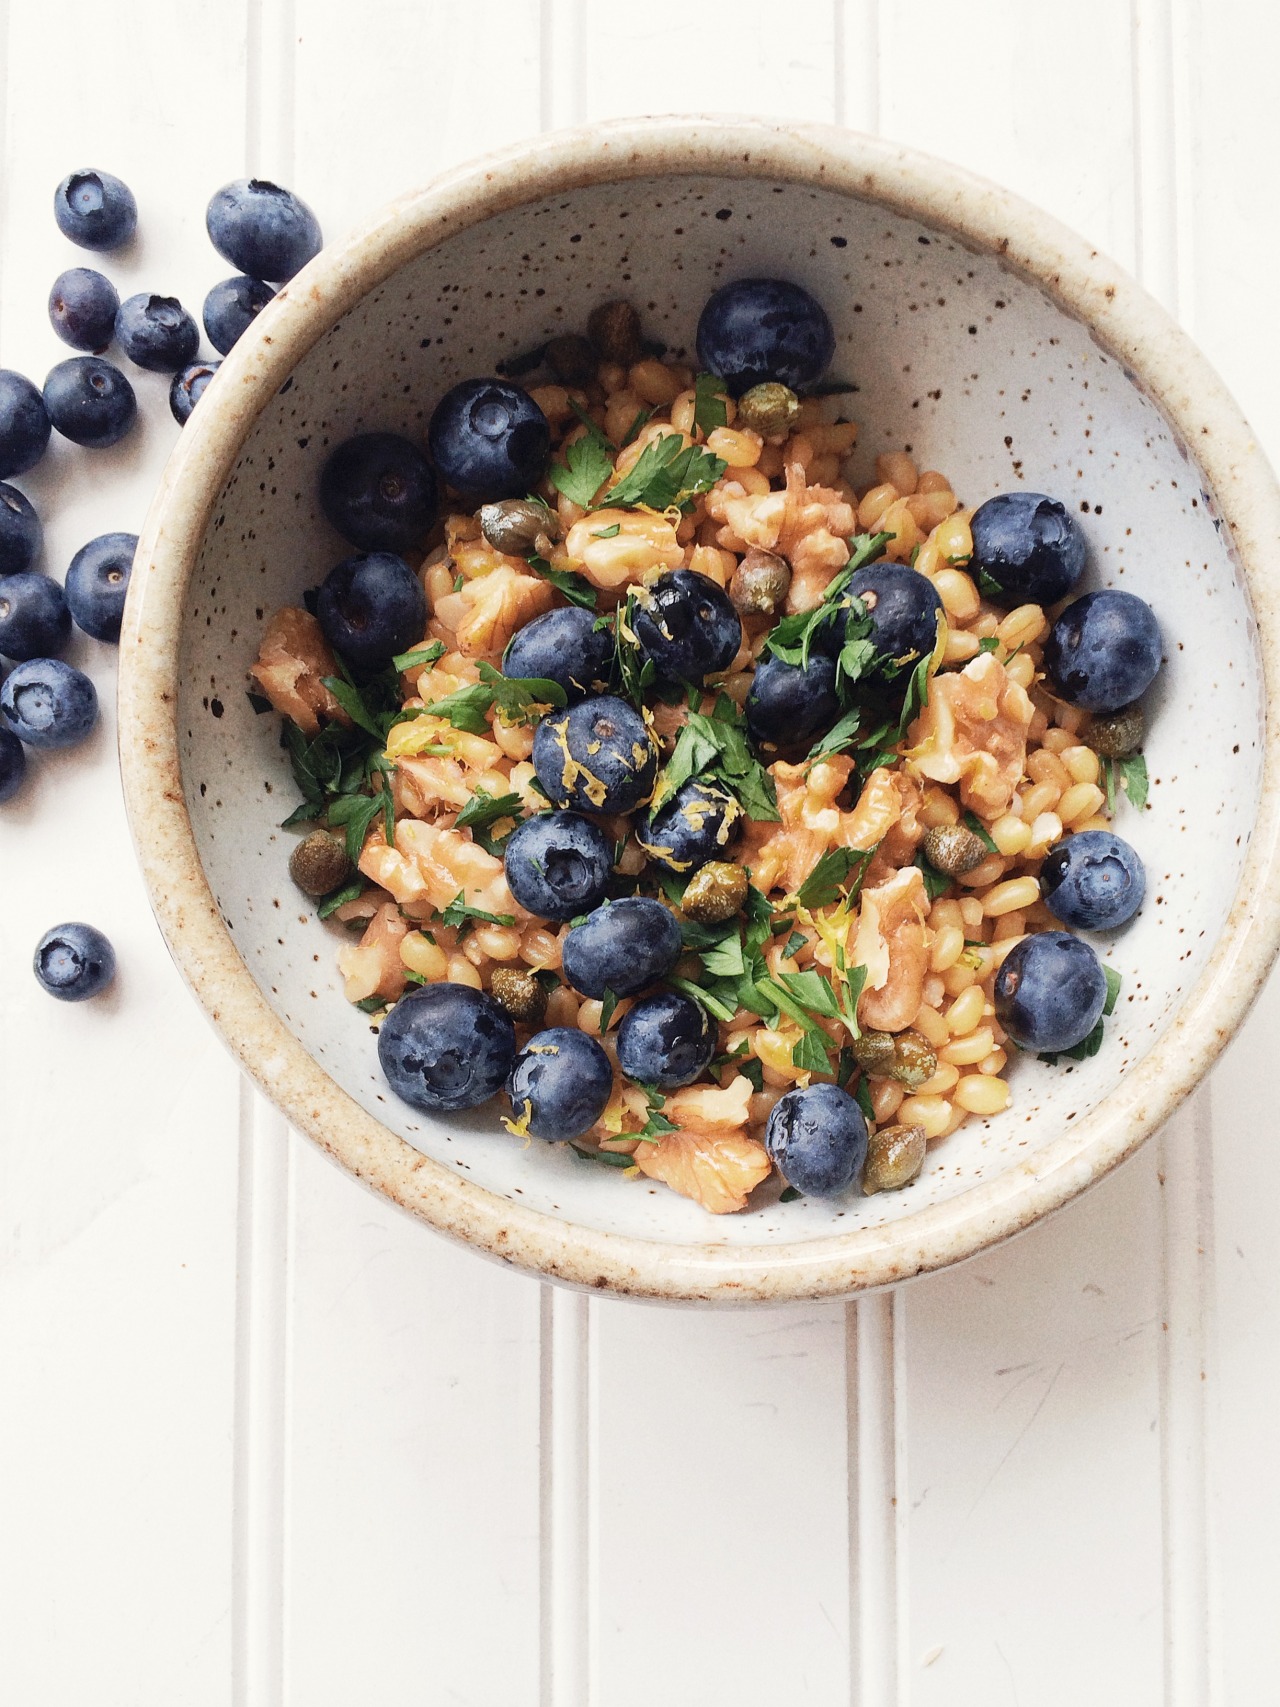 How to use your free blueberries in a savory dish, you ask? Try this toasted pecan & blueberry couscous salad from Joy The Baker. We tried it for lunch this week found it absolutely divine.
Don’t forget to order your free blueberries before Sunday,...